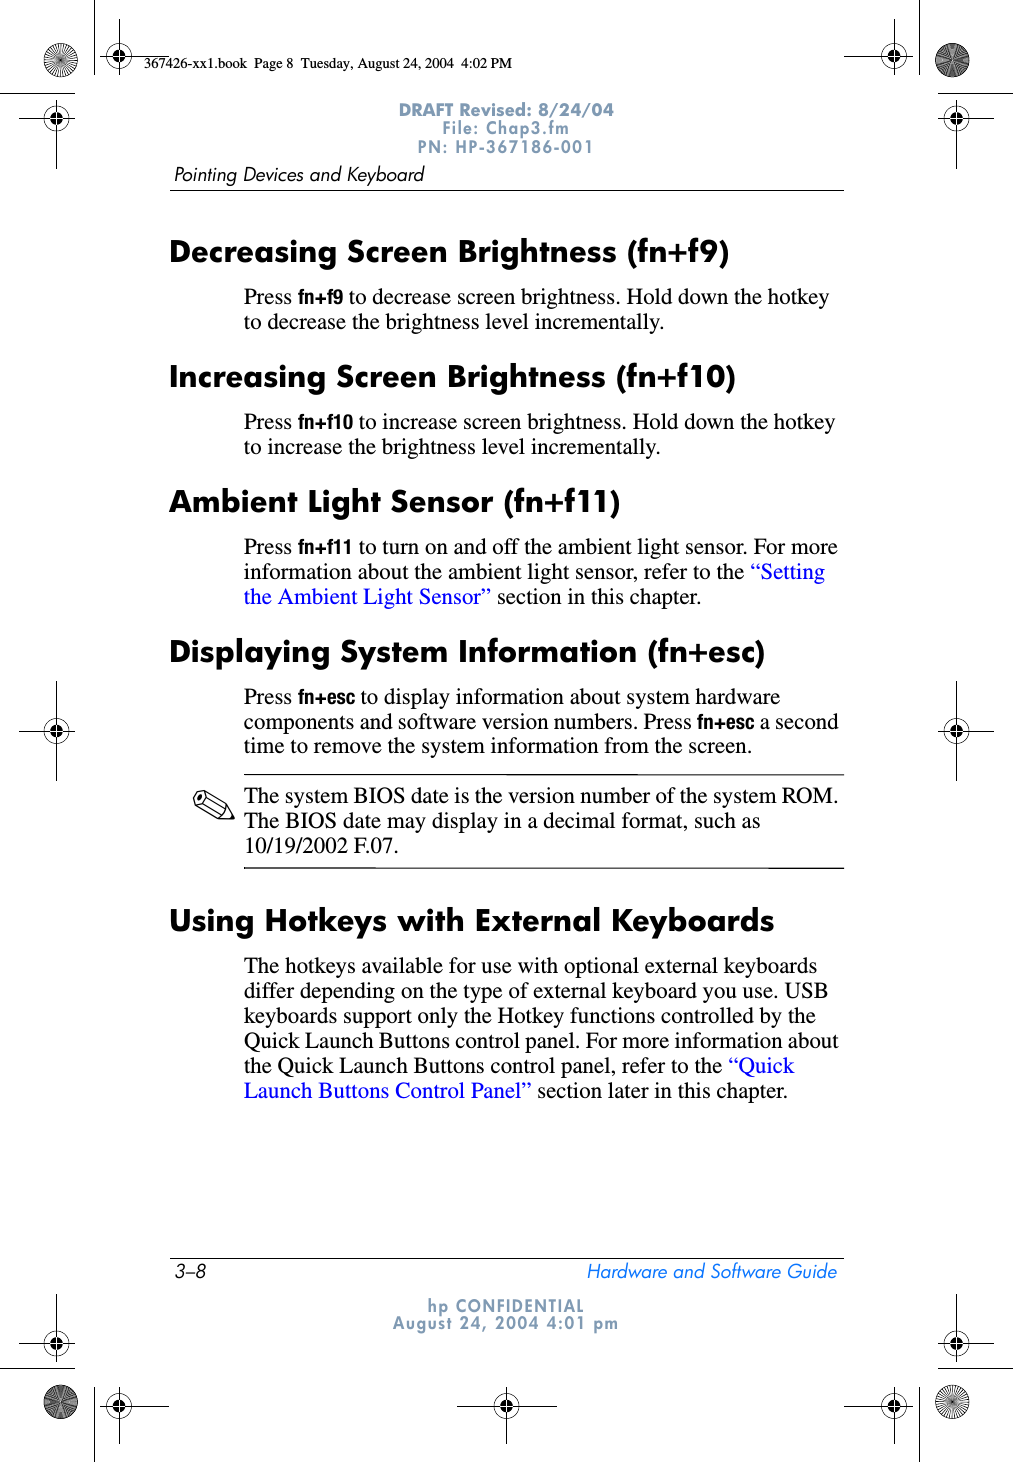 3–8 Hardware and Software GuidePointing Devices and KeyboardDRAFT Revised: 8/24/04File: Chap3.fm PN: HP-367186-001 hp CONFIDENTIALAugust 24, 2004 4:01 pmDecreasing Screen Brightness (fn+f9)Press fn+f9 to decrease screen brightness. Hold down the hotkey to decrease the brightness level incrementally.Increasing Screen Brightness (fn+f10)Press fn+f10 to increase screen brightness. Hold down the hotkey to increase the brightness level incrementally.Ambient Light Sensor (fn+f11)Press fn+f11 to turn on and off the ambient light sensor. For more information about the ambient light sensor, refer to the “Setting the Ambient Light Sensor” section in this chapter.Displaying System Information (fn+esc)Press fn+esc to display information about system hardware components and software version numbers. Press fn+esc a second time to remove the system information from the screen.✎The system BIOS date is the version number of the system ROM. The BIOS date may display in a decimal format, such as 10/19/2002 F.07.Using Hotkeys with External KeyboardsThe hotkeys available for use with optional external keyboards differ depending on the type of external keyboard you use. USB keyboards support only the Hotkey functions controlled by the Quick Launch Buttons control panel. For more information about the Quick Launch Buttons control panel, refer to the “Quick Launch Buttons Control Panel” section later in this chapter.367426-xx1.book  Page 8  Tuesday, August 24, 2004  4:02 PM